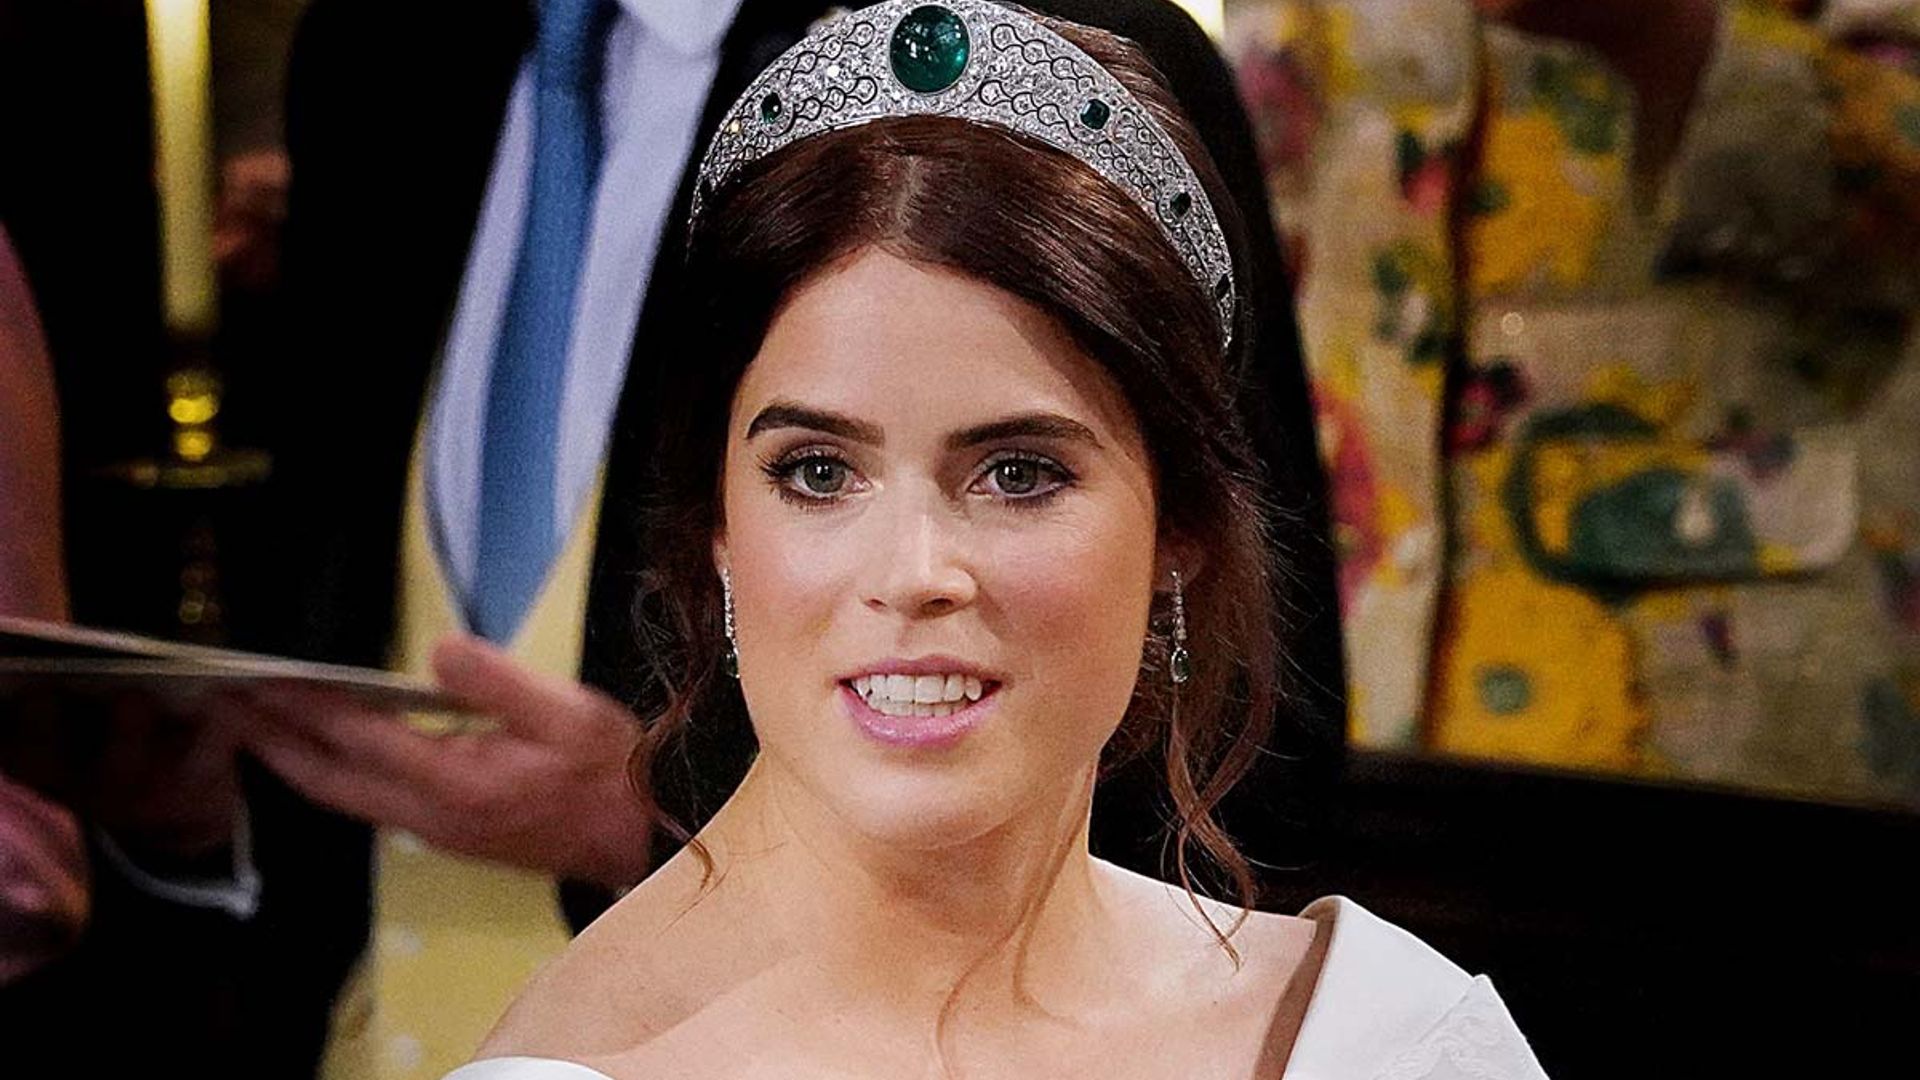 Princess Eugenie's subtle tribute to Prince Andrew in her wedding dress unveiled - did you spot it?